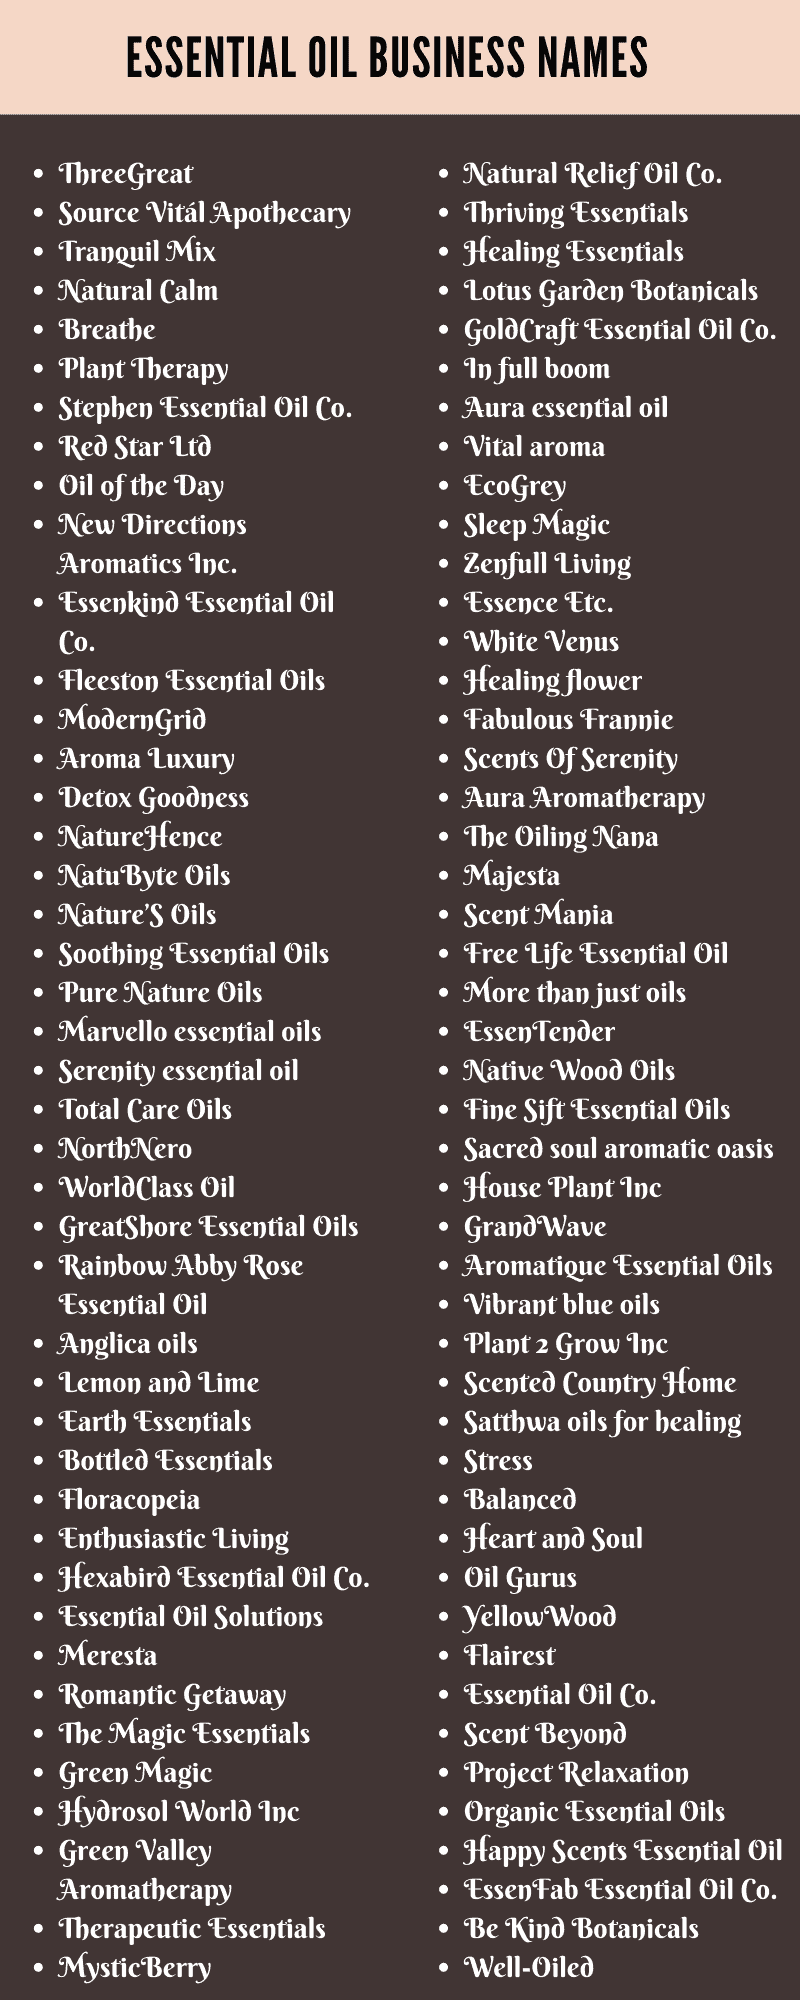 Essential Oil Business Names